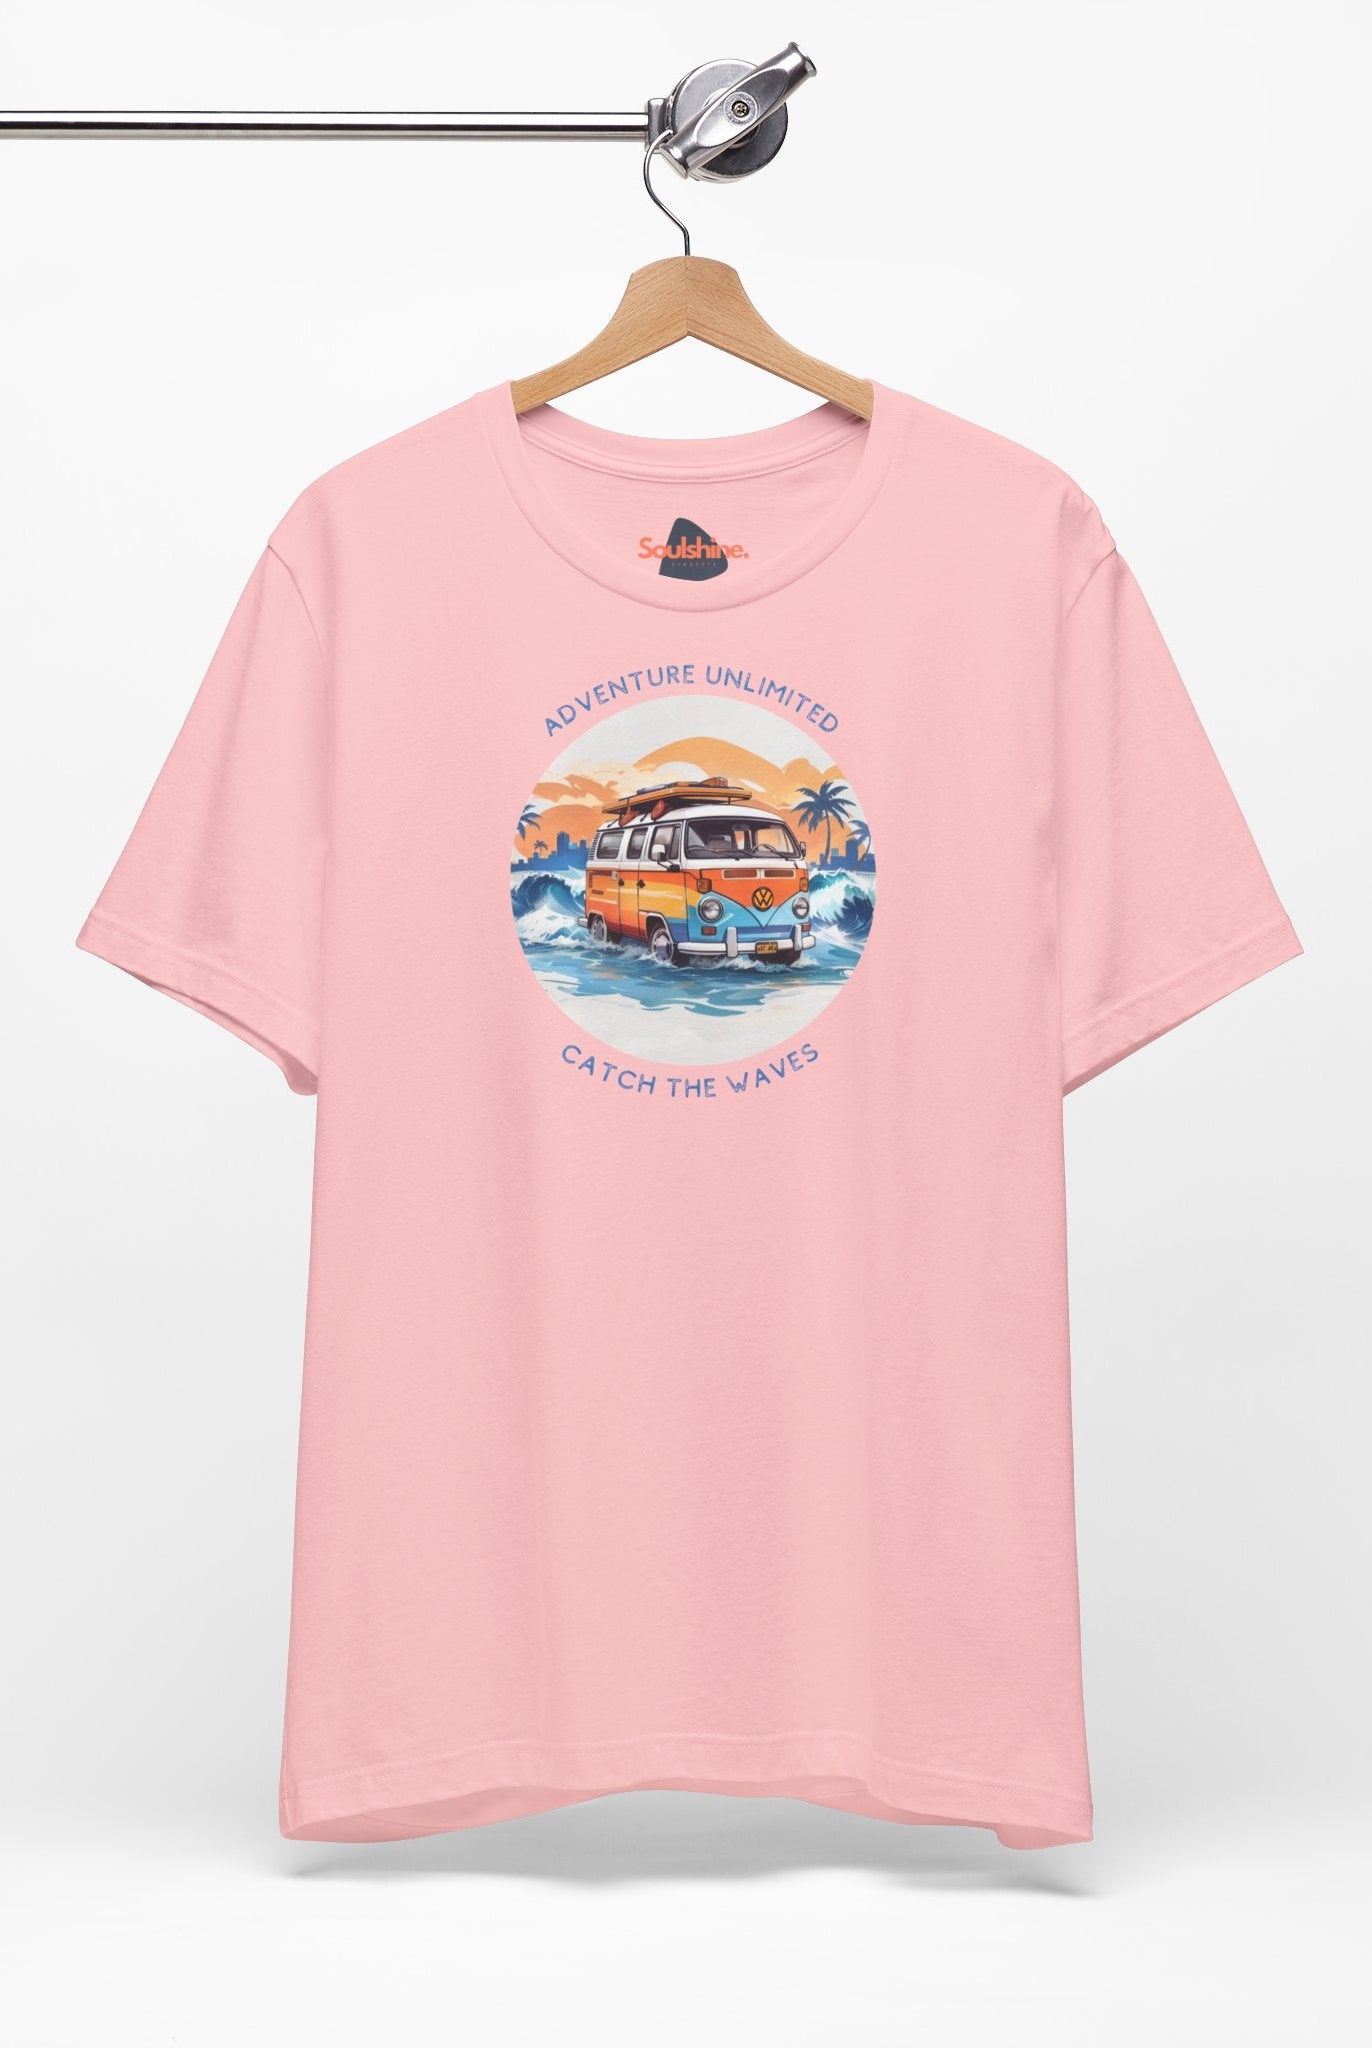 Adventure Unlimited Surfing T-Shirt with ’s on the water printed - Soulshinecreators - Bella & Canvas - EU